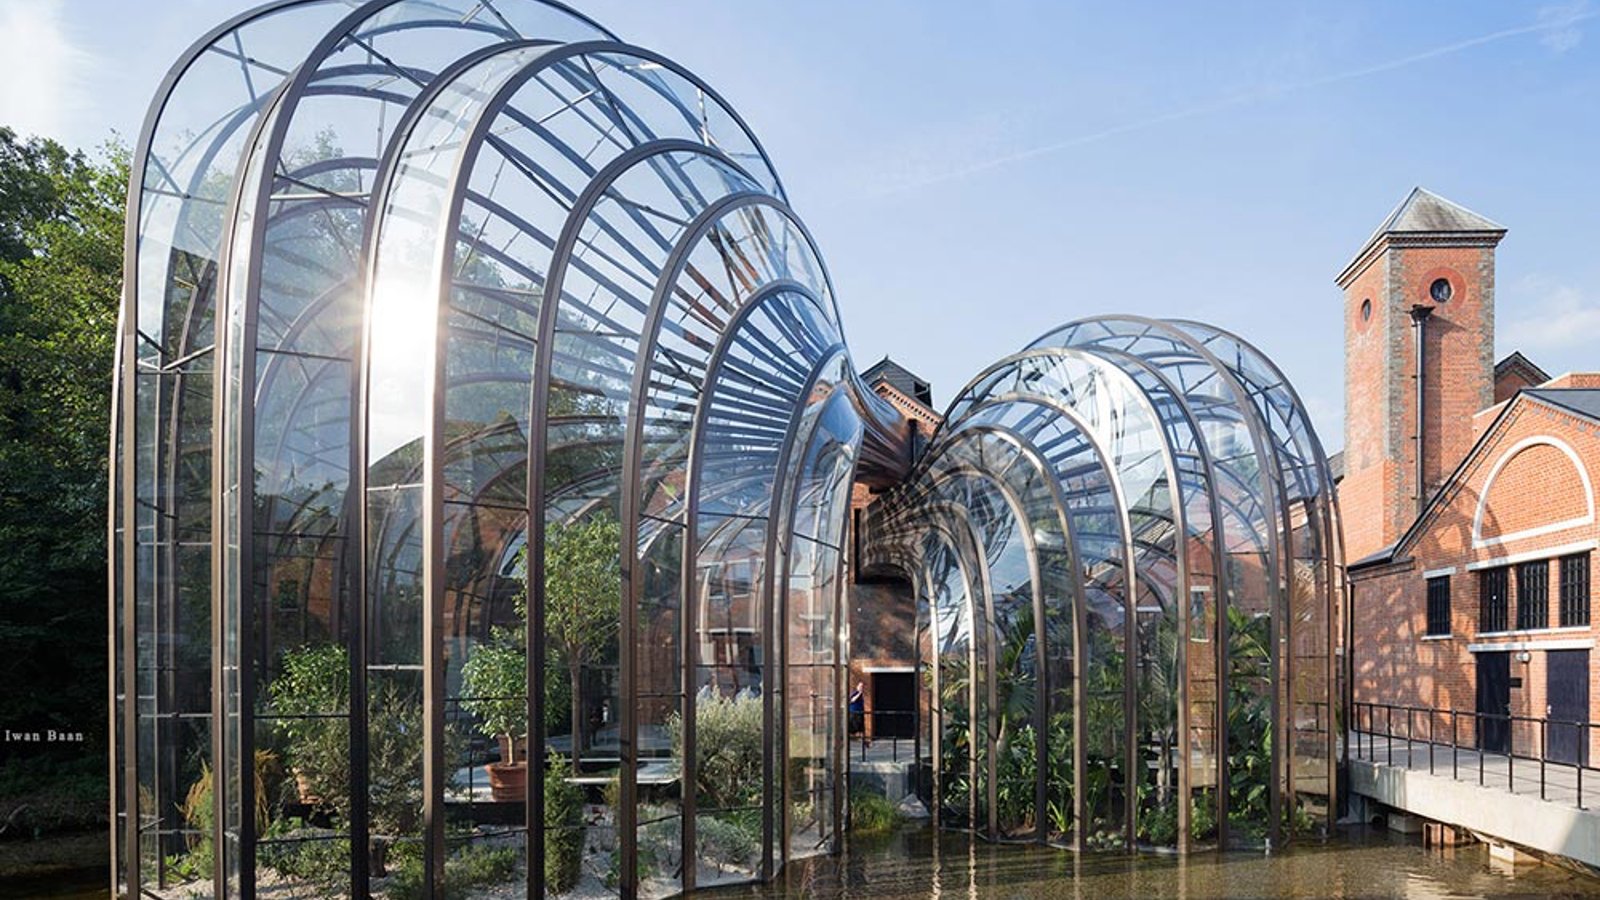 The two glasshouses that sit alongside each other home the botanicals used in the production of Bombay Sapphire gin